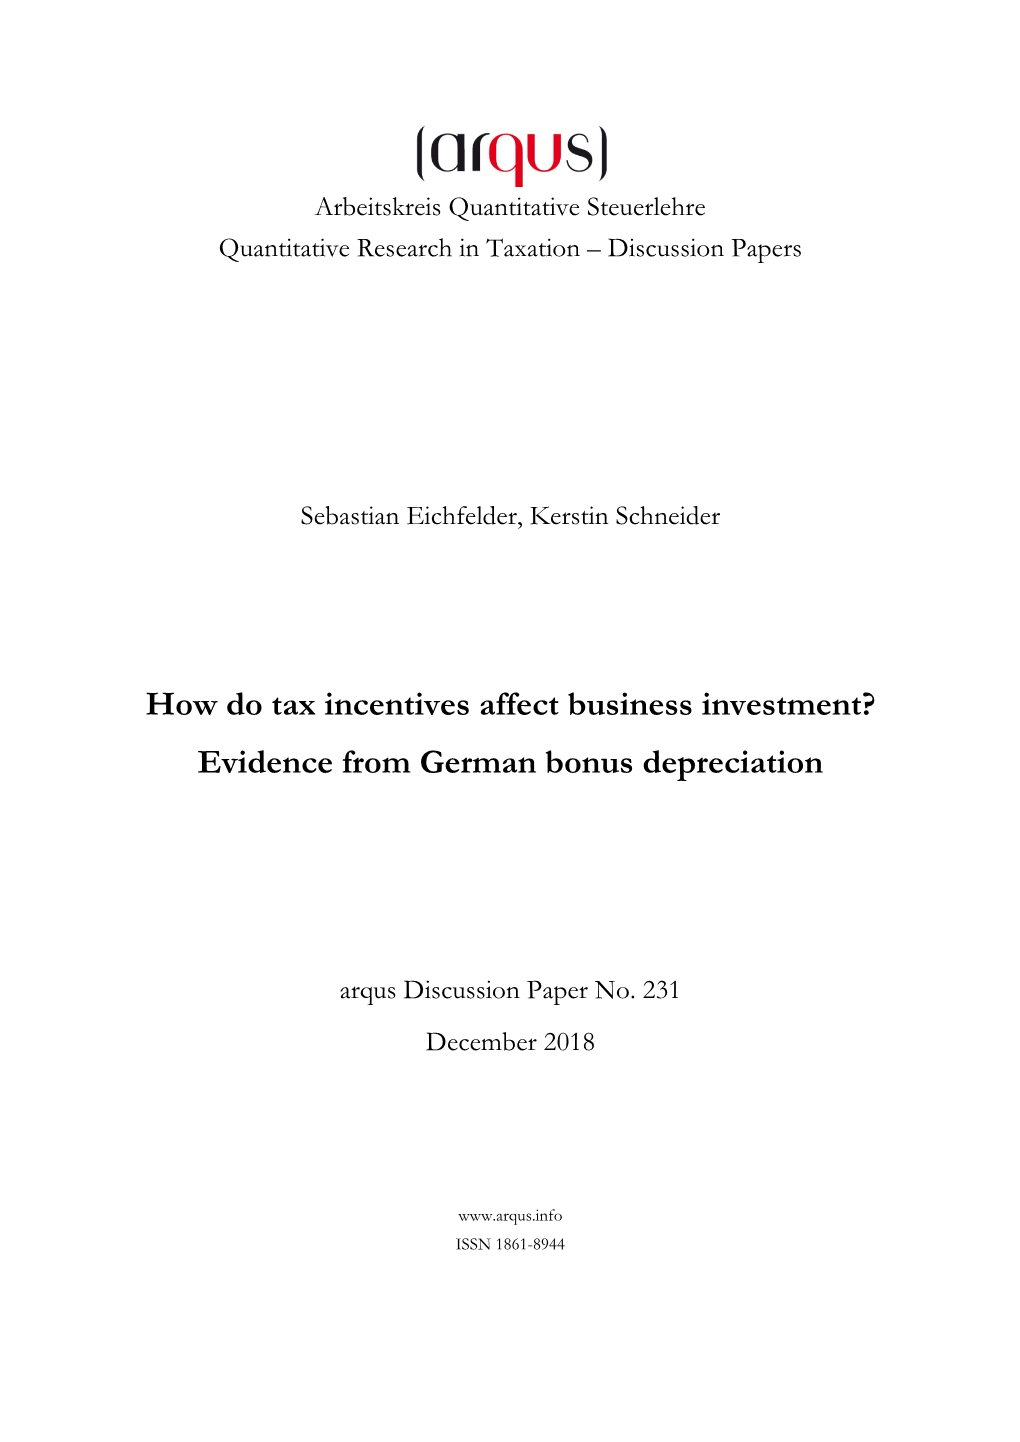 How Do Tax Incentives Affect Business Investment? Evidence from German Bonus Depreciation